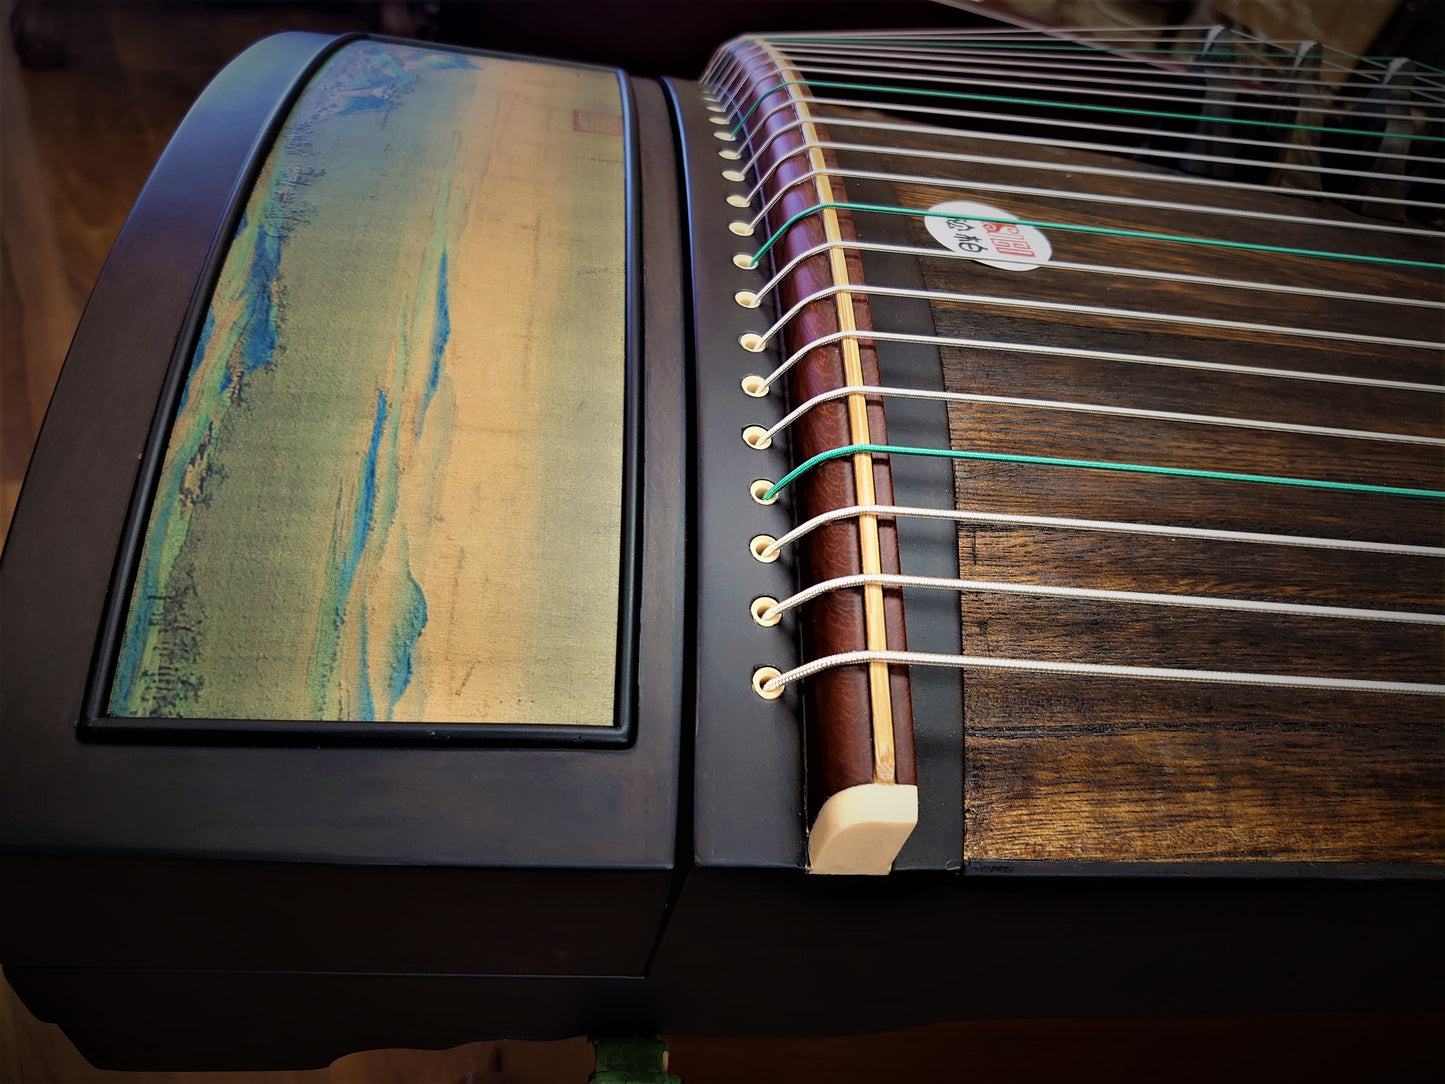 Songbo Madagascar Rosewood "A Thousand Li of Rivers and Mountains" Guzheng